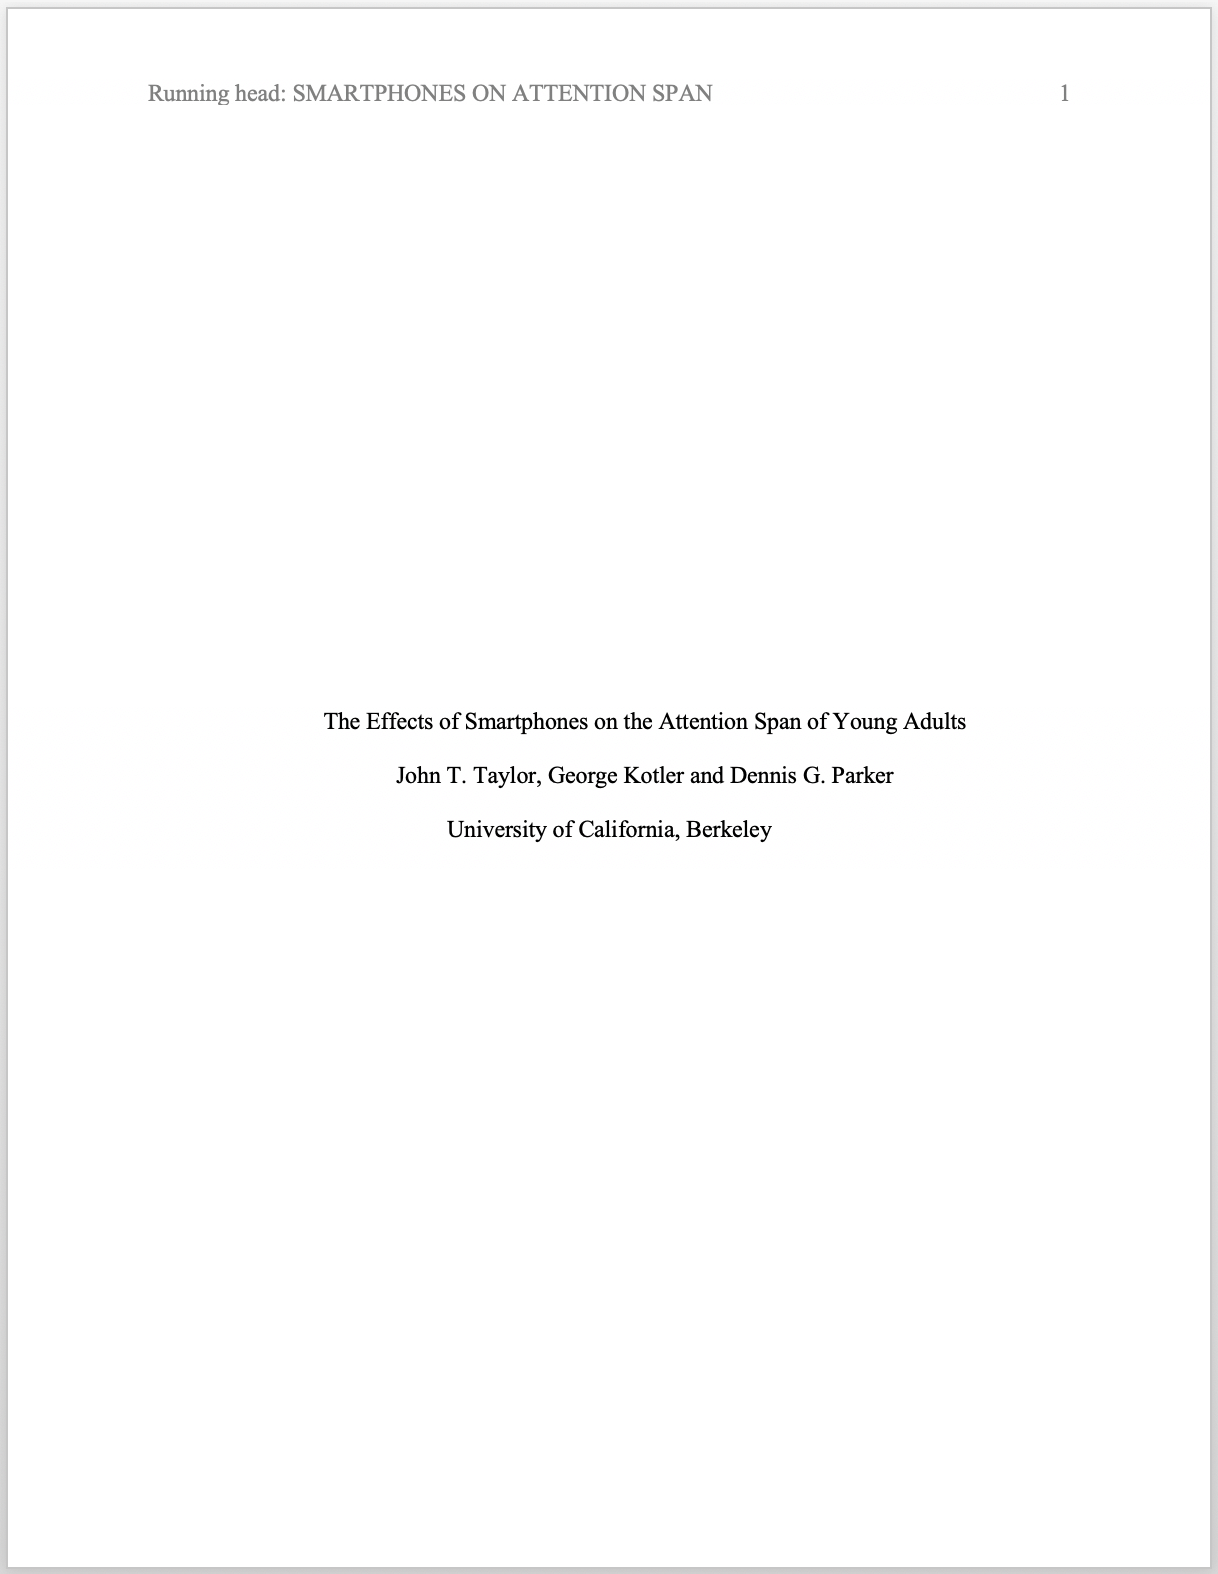 apa format title page and abstract